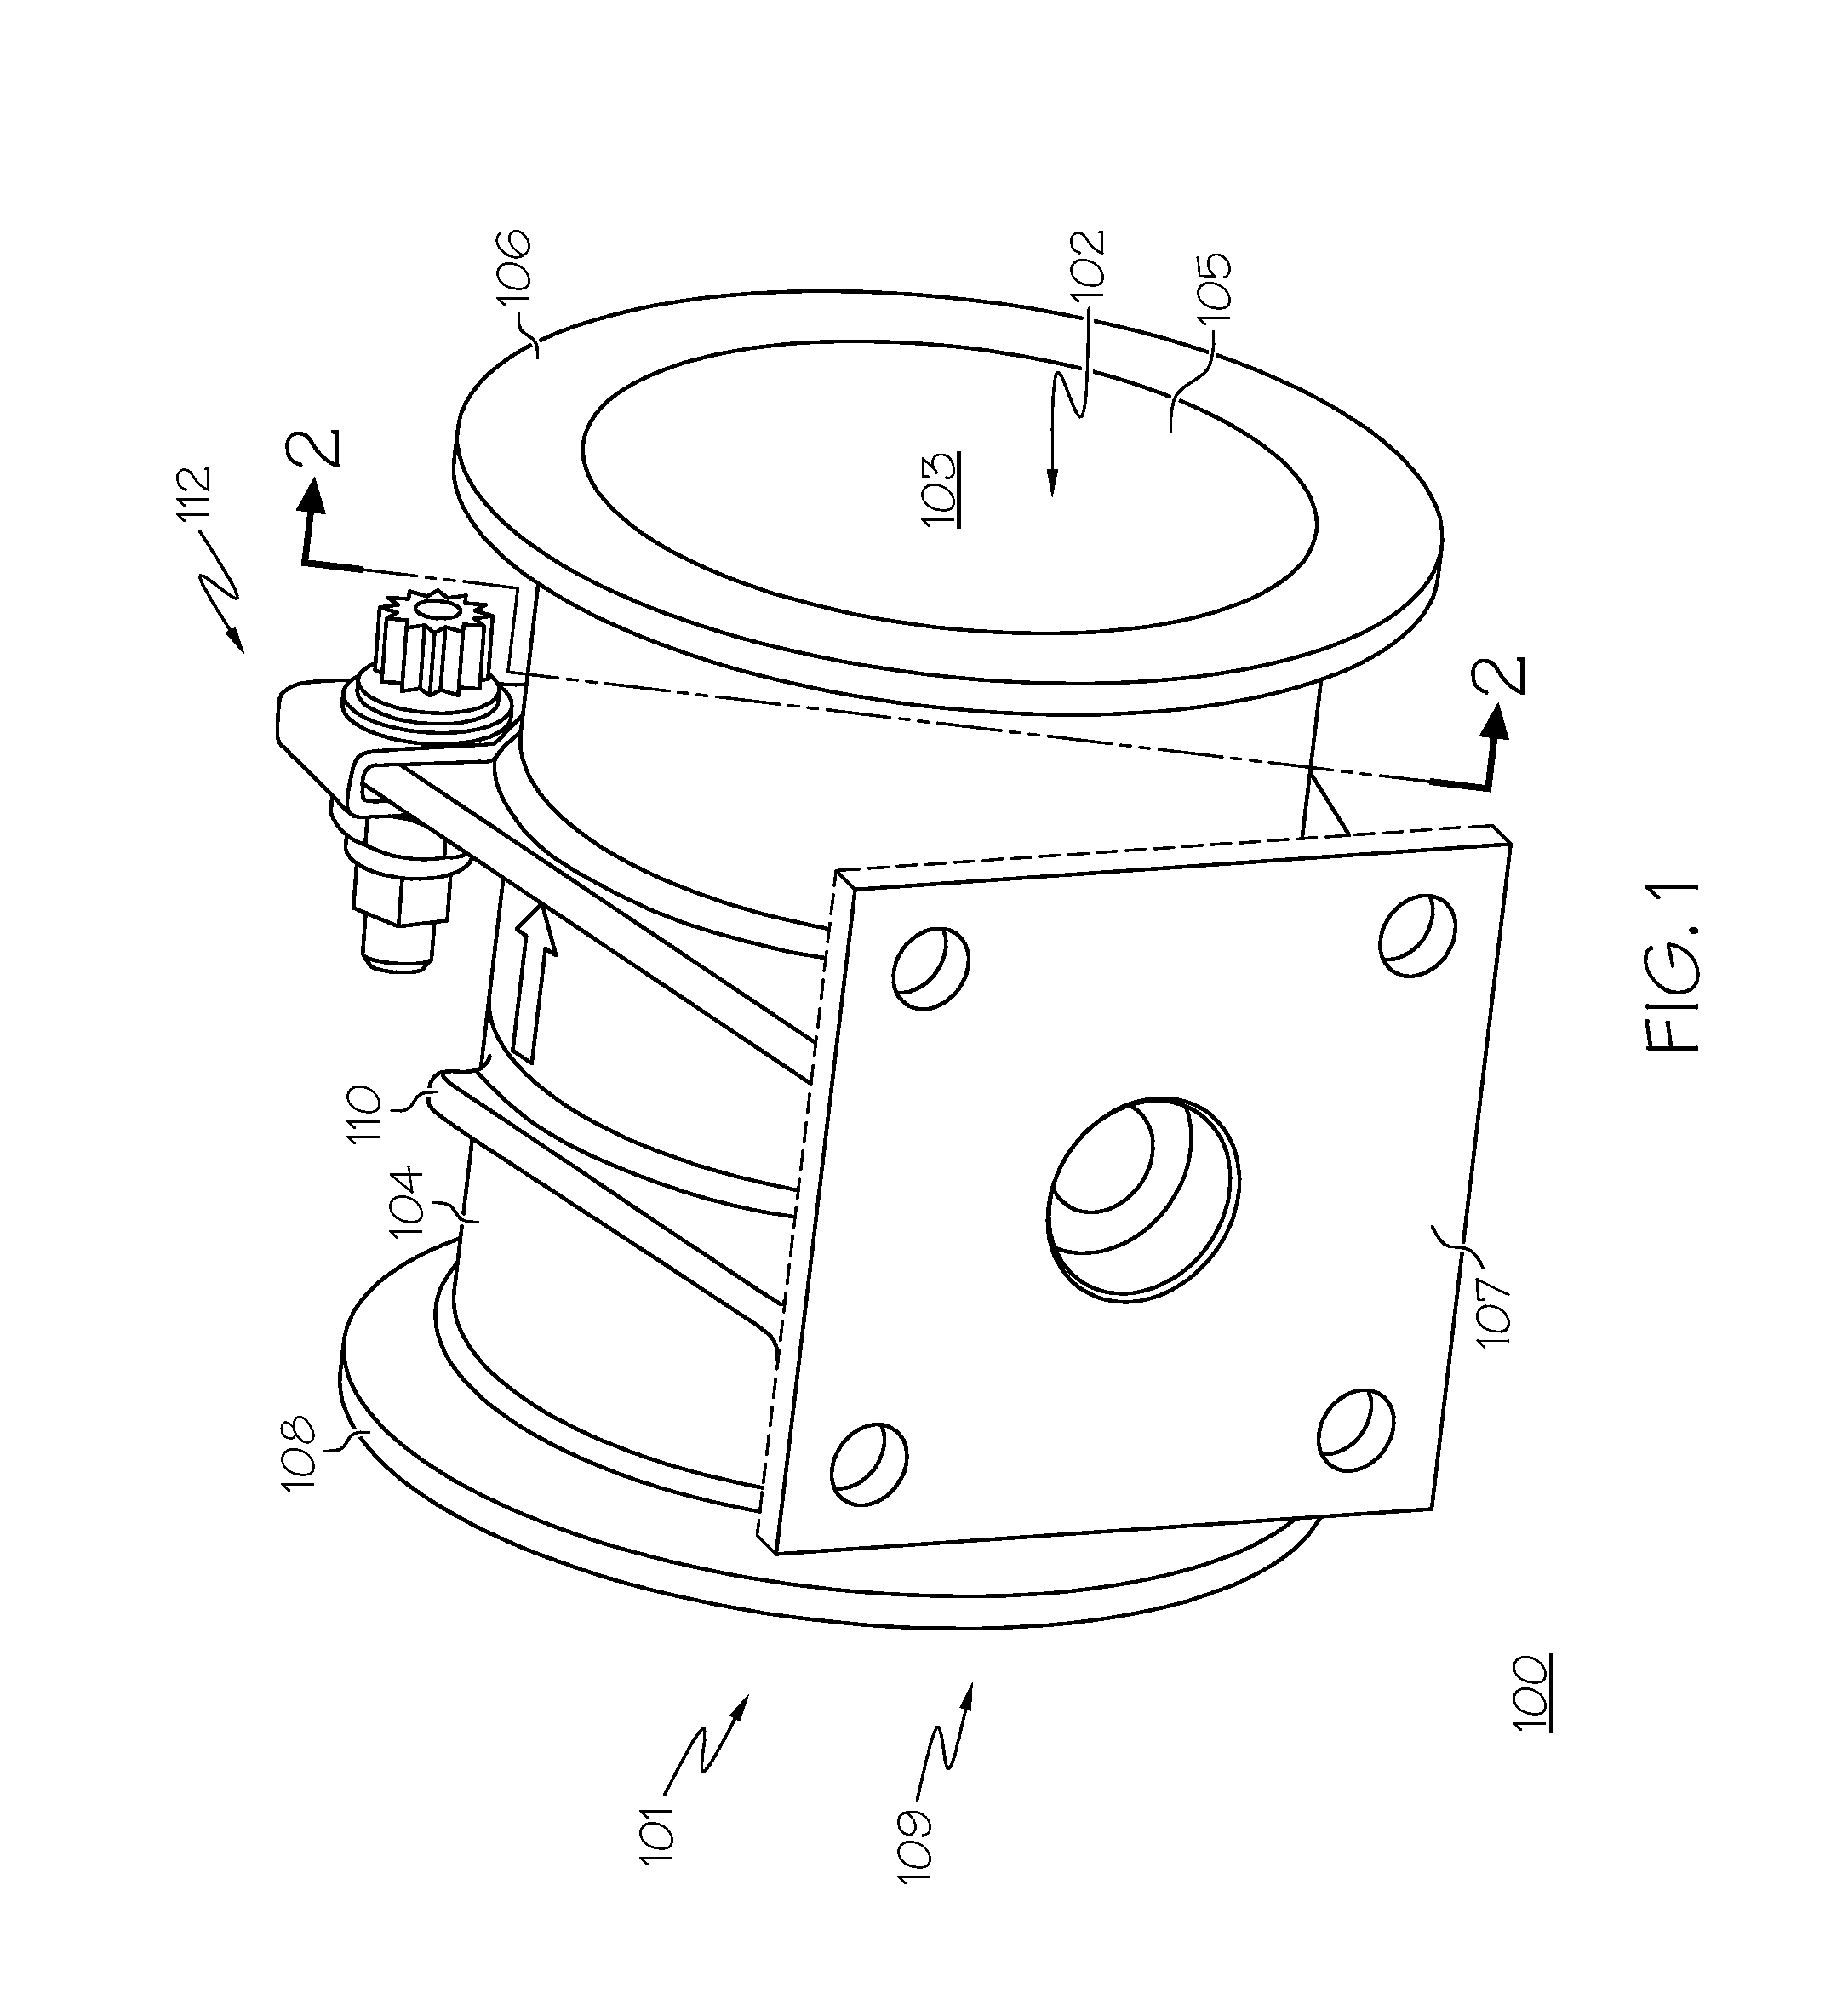 Composite valve assembly for aircraft environmental control systems